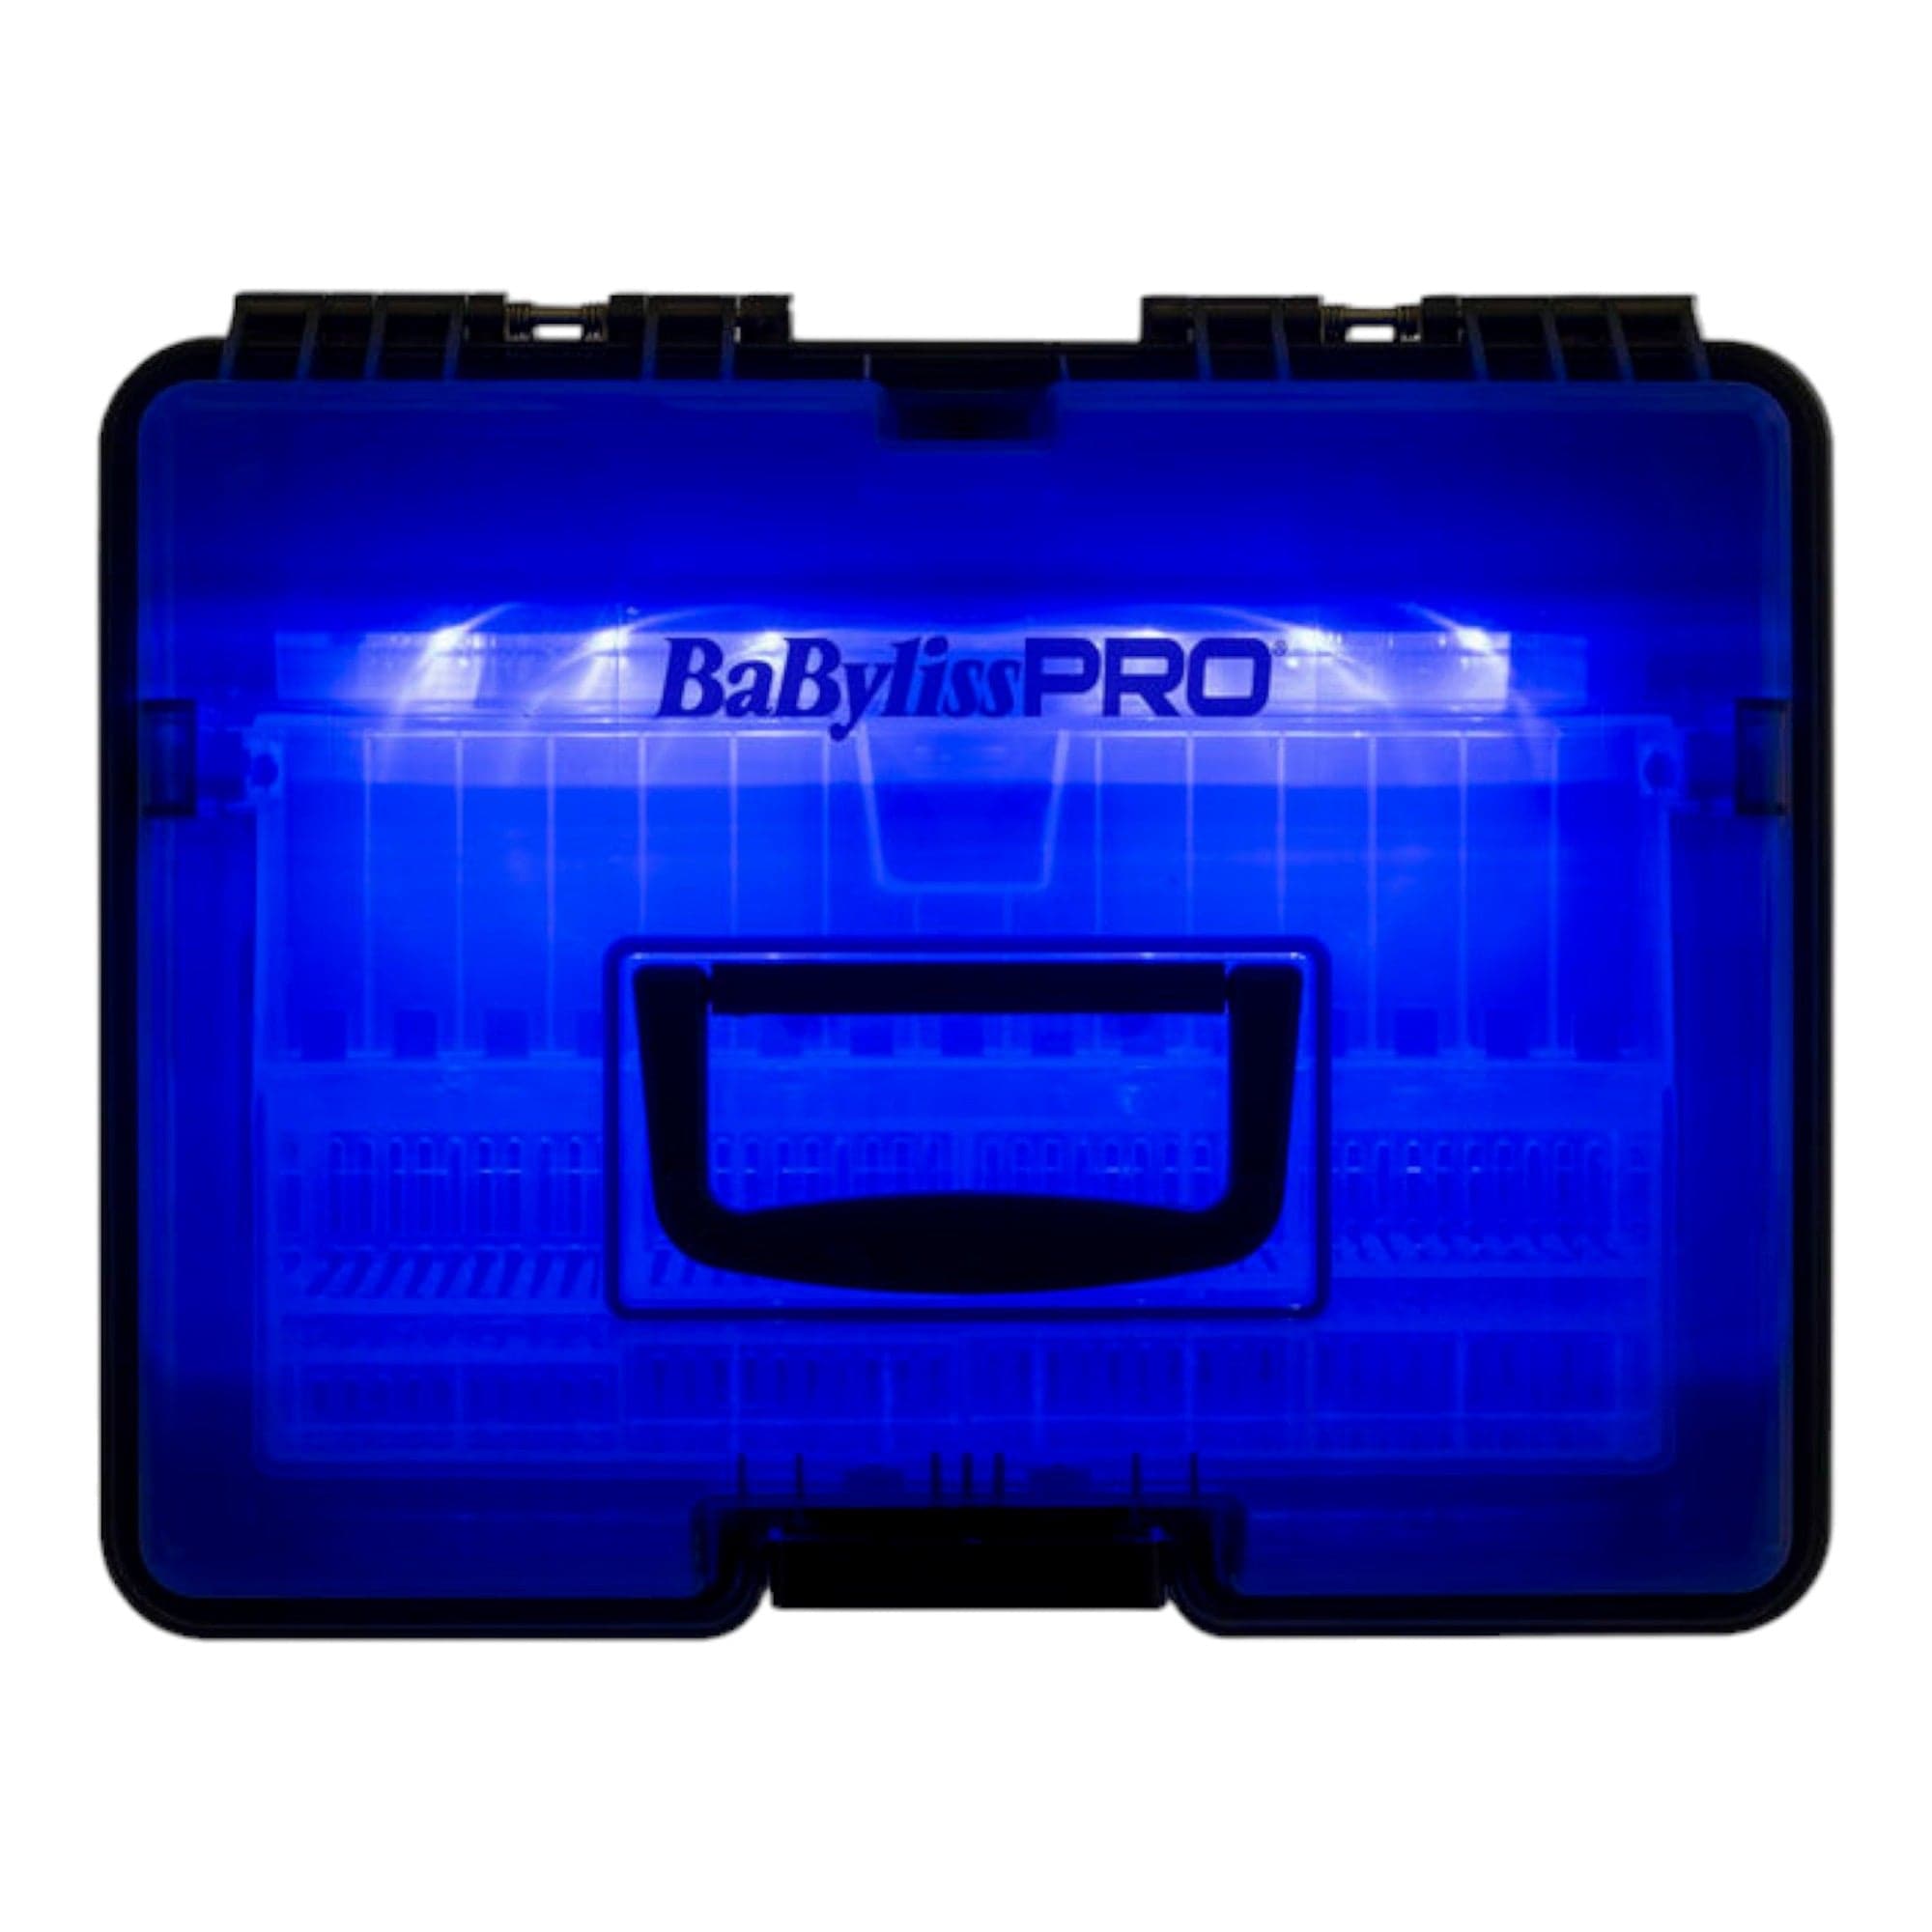 Babyliss Pro - Barbersonic Professional Disinfectant Solution Box